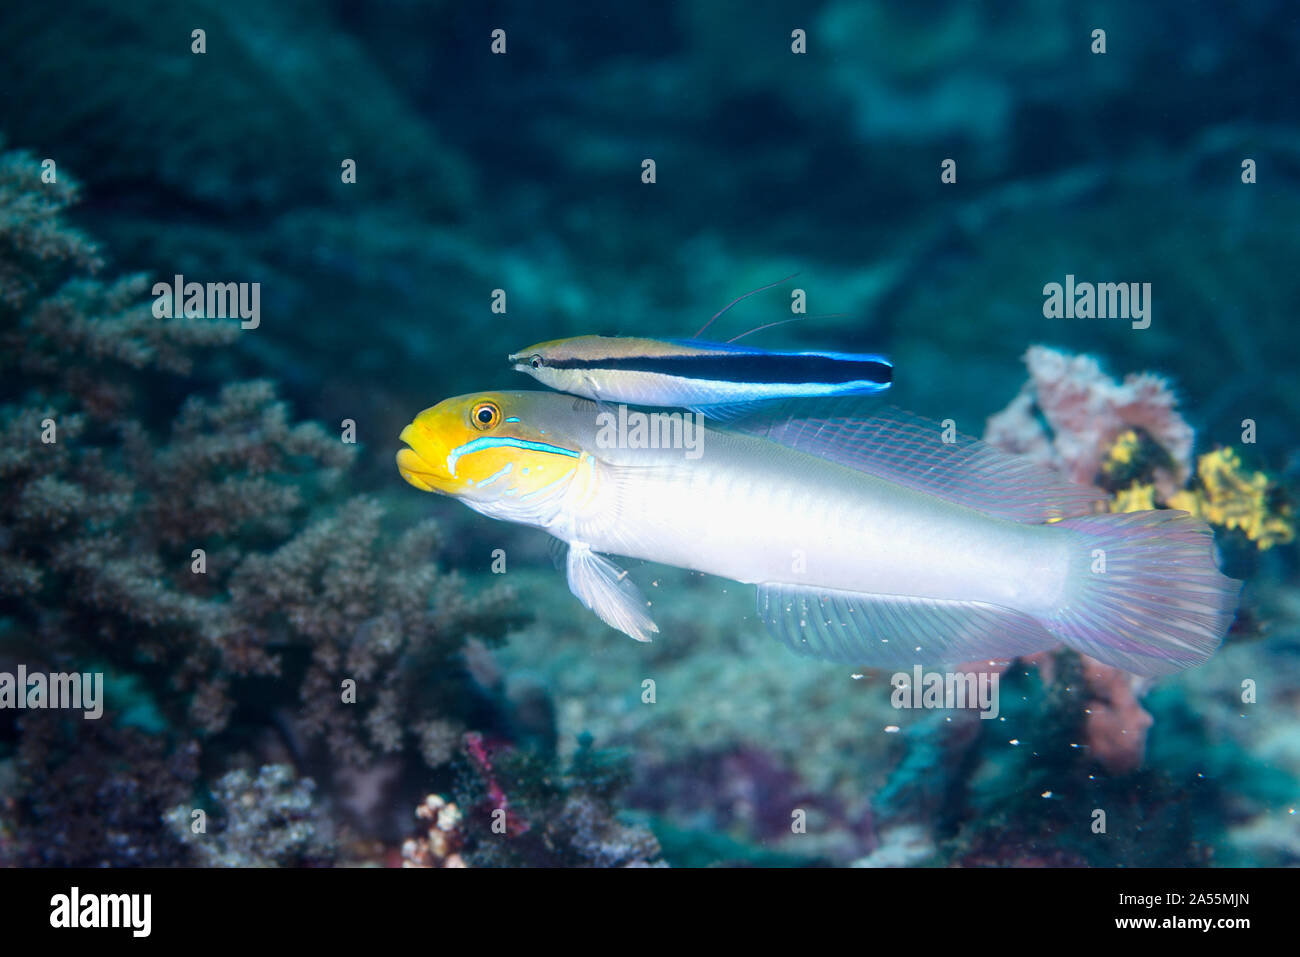 Bluestreak Goby [Valenciennea strigata] with a Bluestrea Cleaner Wrasse [Labroides dimidiatus], West Papua, Indonesia.  Indo-West Pacific. Stock Photo